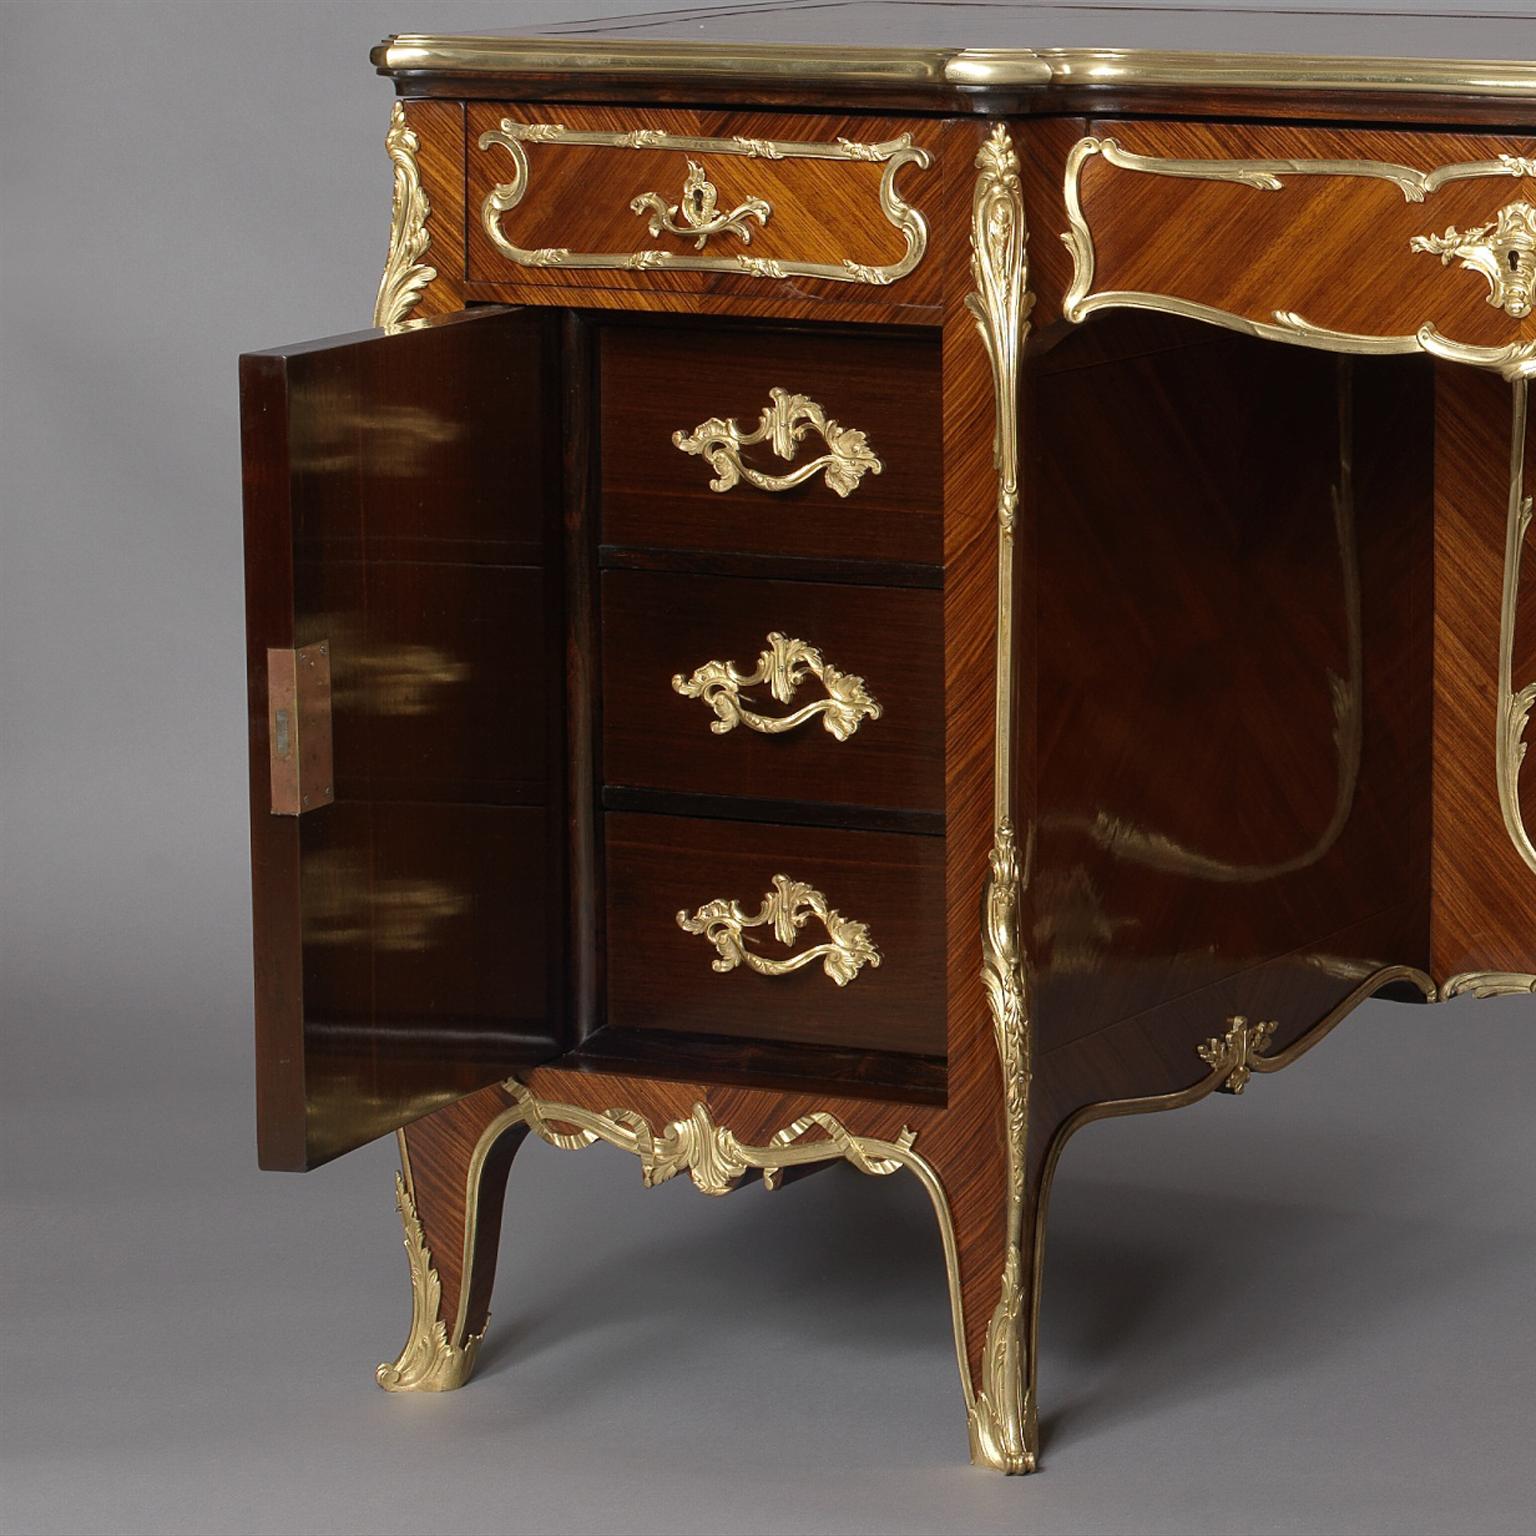 French Rare Gilt-Bronze Mounted Marquetry Pedestal Desk by François Linke, circa 1900 For Sale